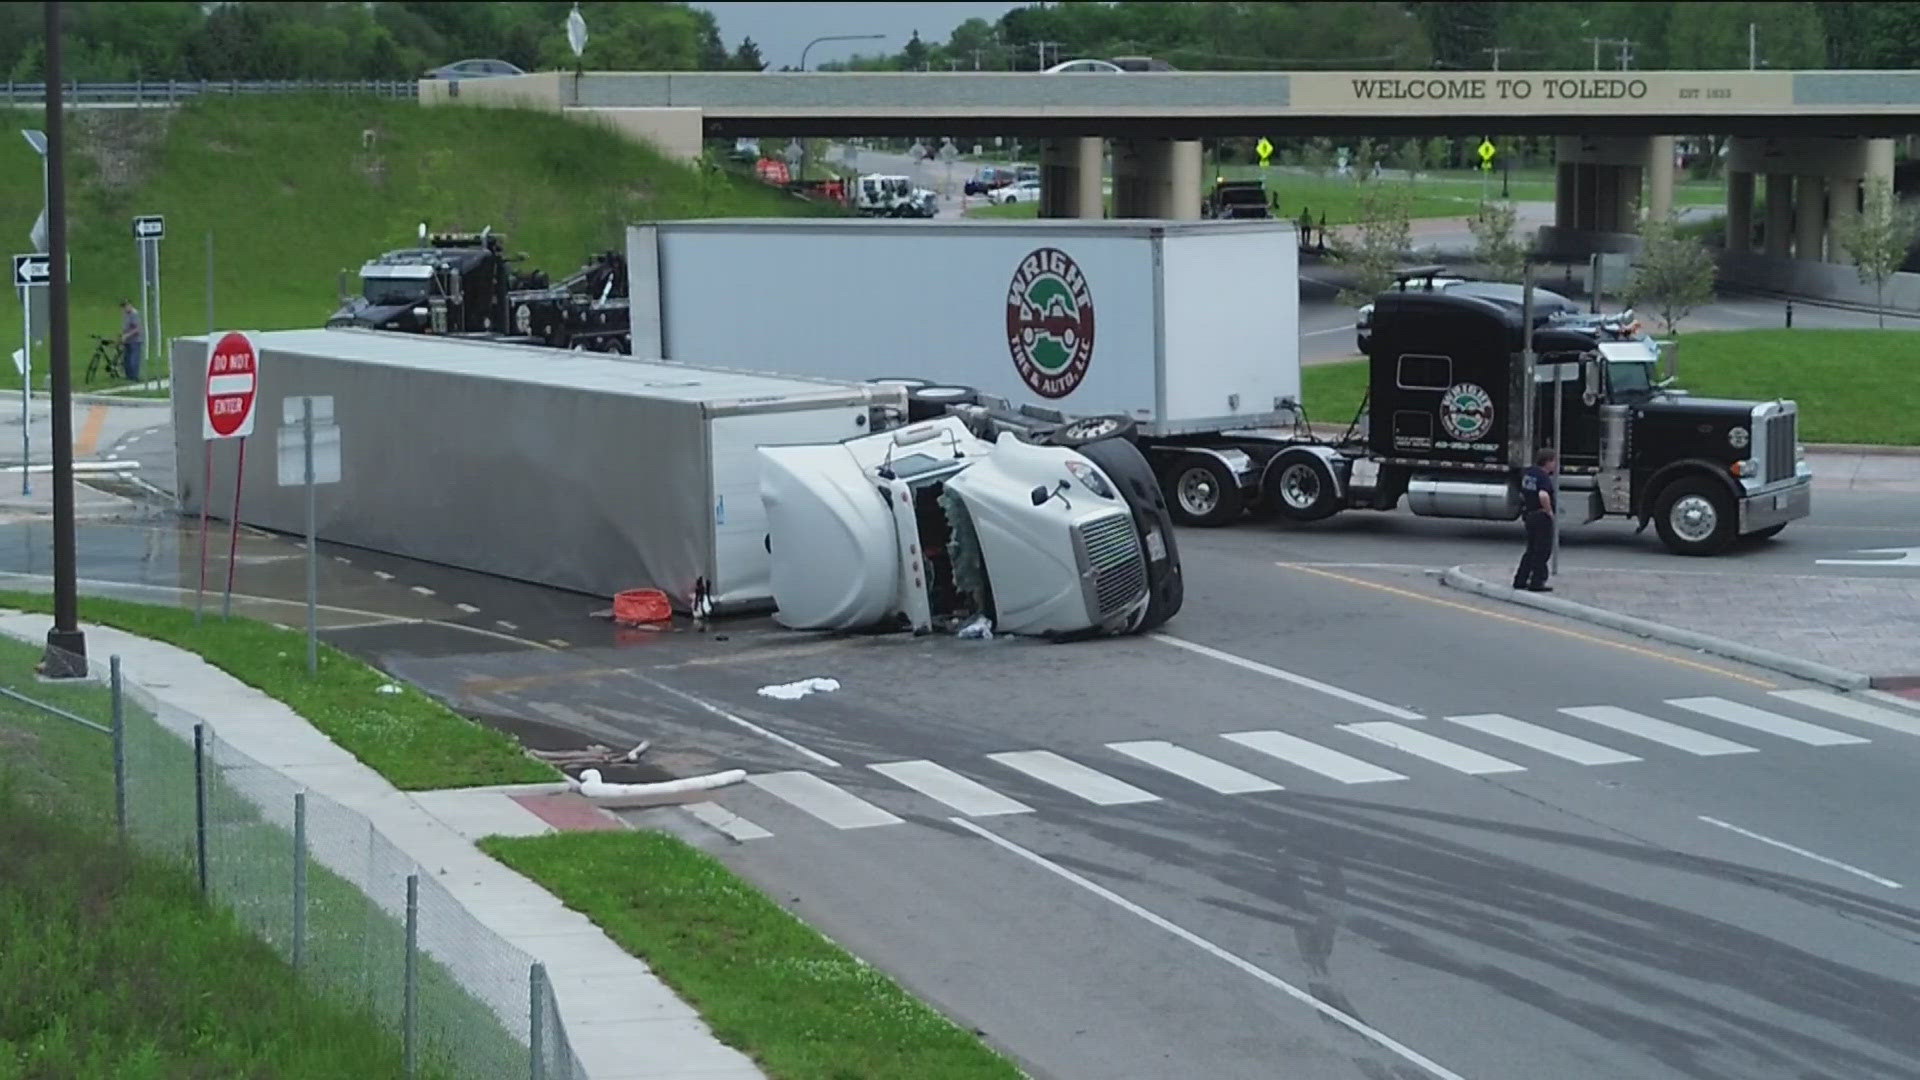 Ohio State Highway Patrol said the semitrailer spilled an oil substance into the roadway.